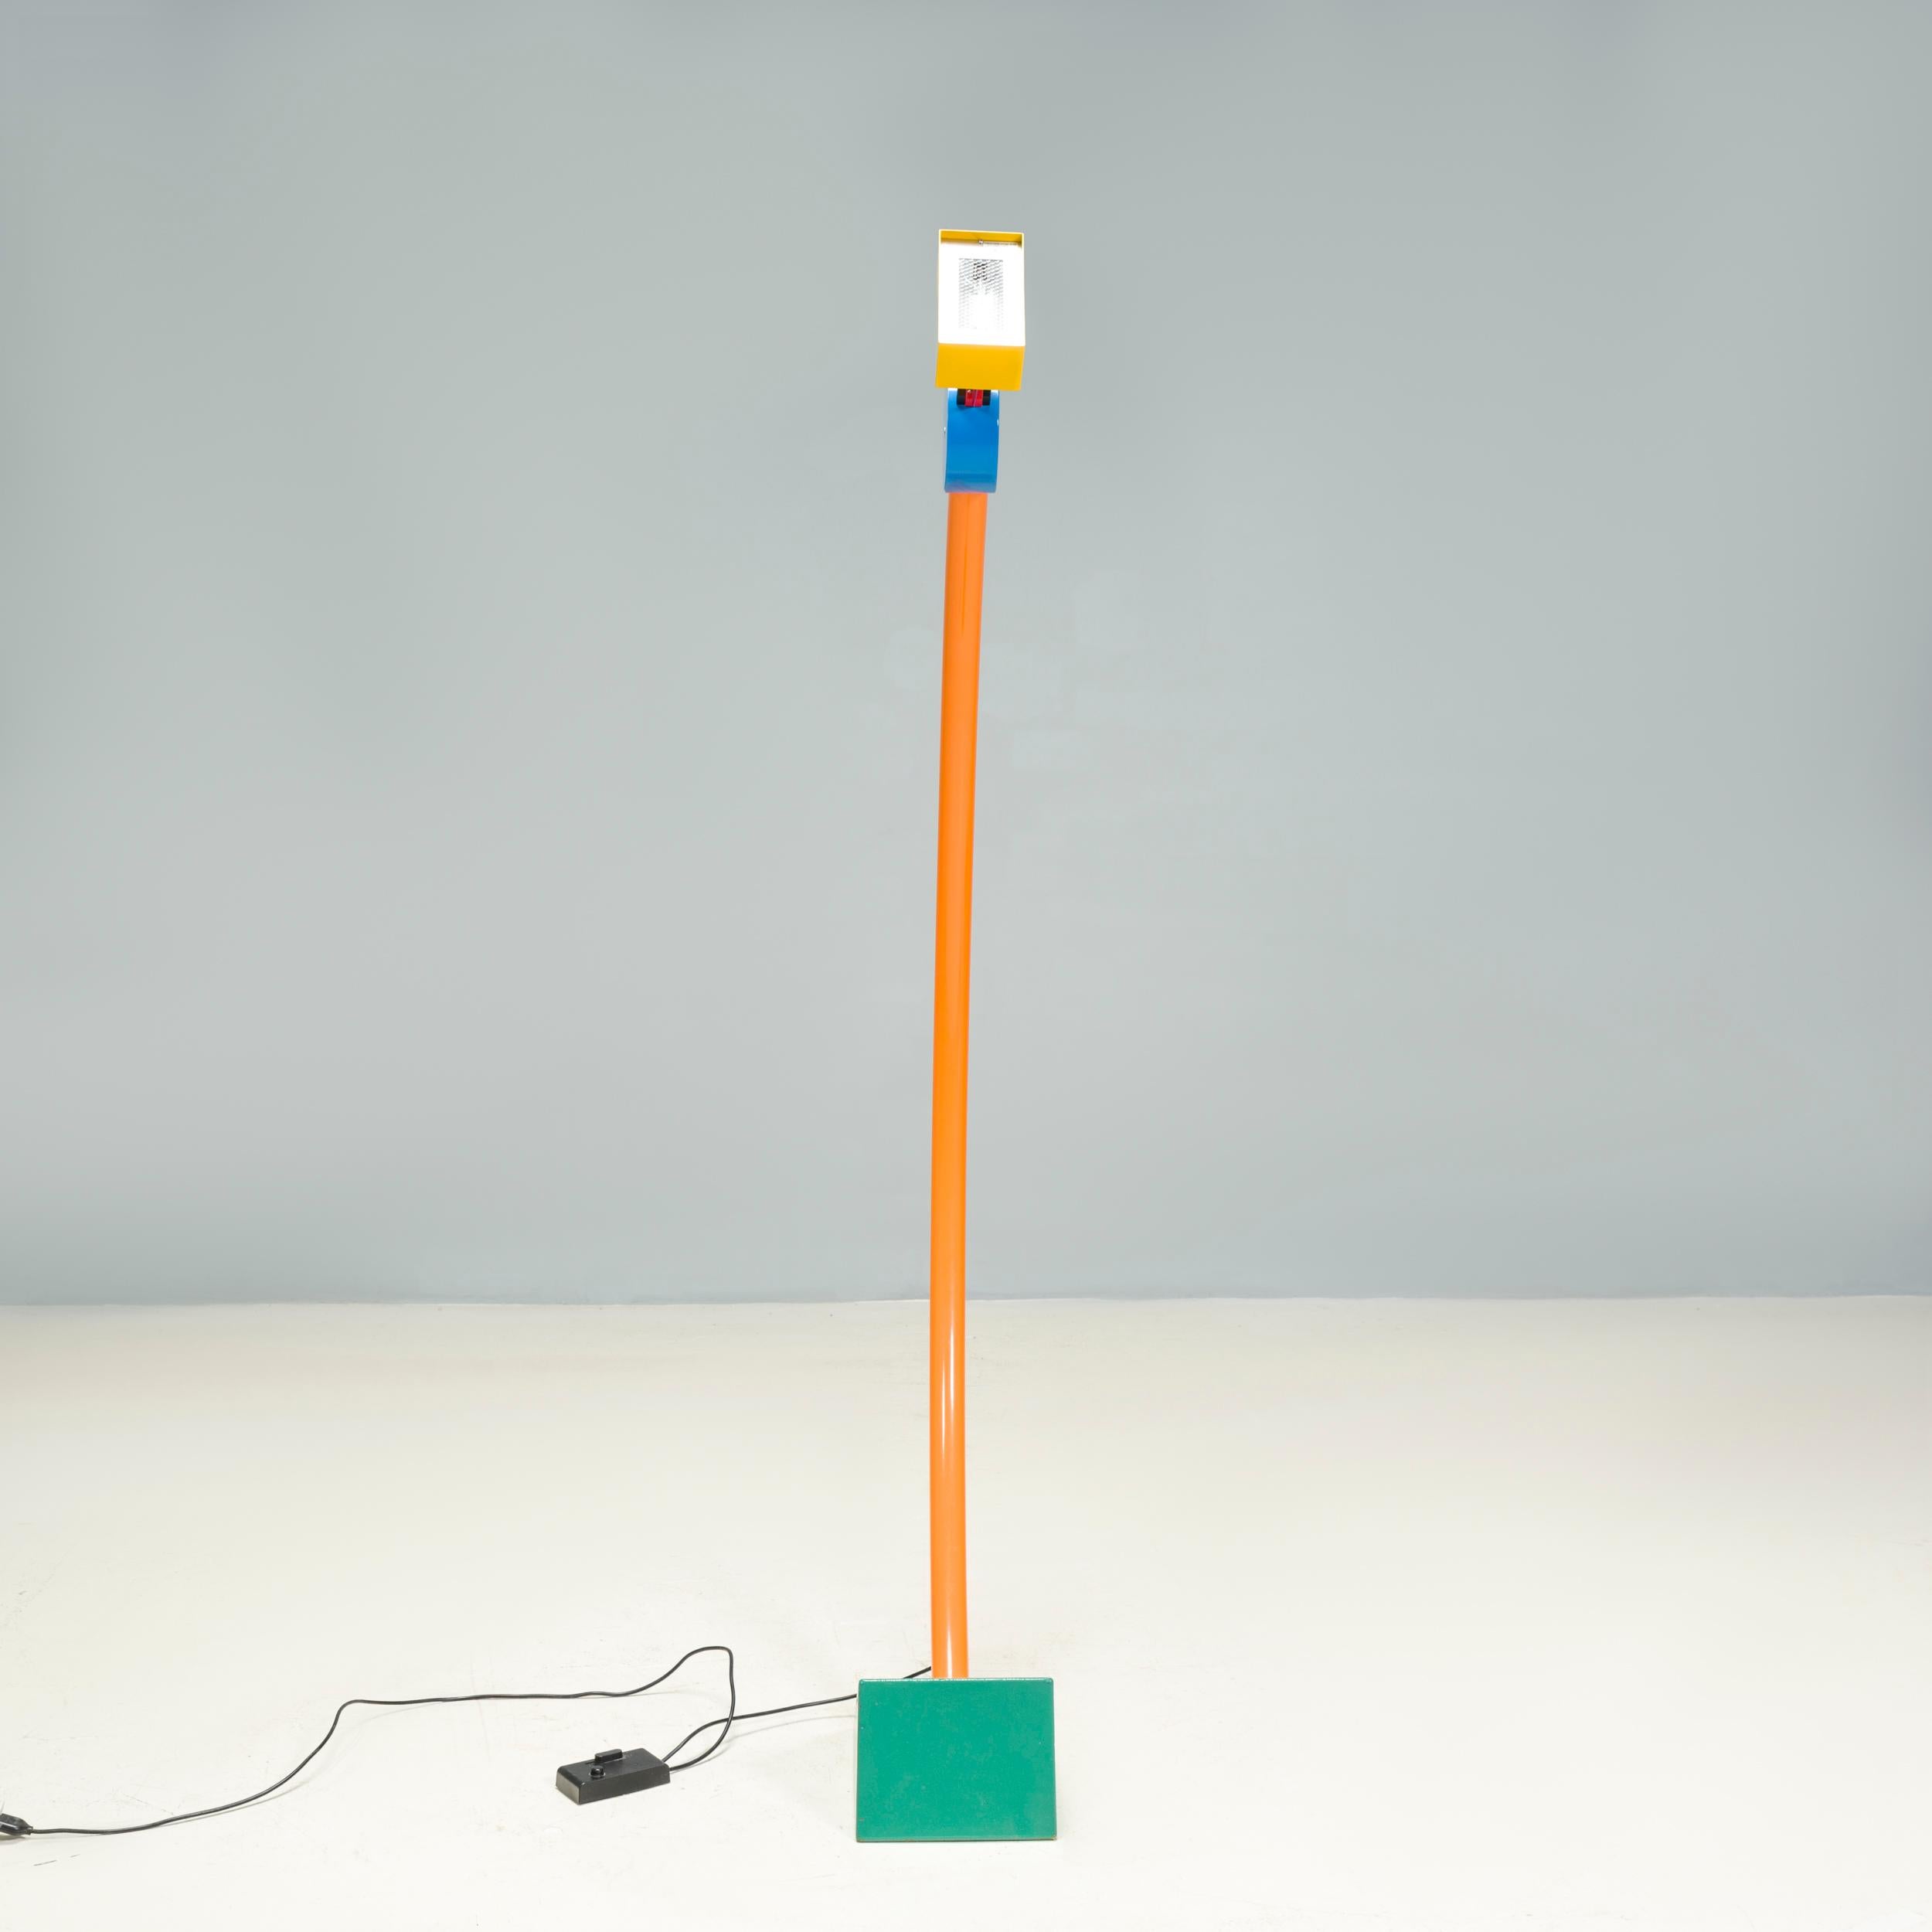 Originally designed by Ettore Sottsass for his company Memphis Milano in 1981, the Treetops floor lamp has since become an icon of the Memphis design movement.

Constructed from painted metal, the lamp perfectly balances irony and charm to create a